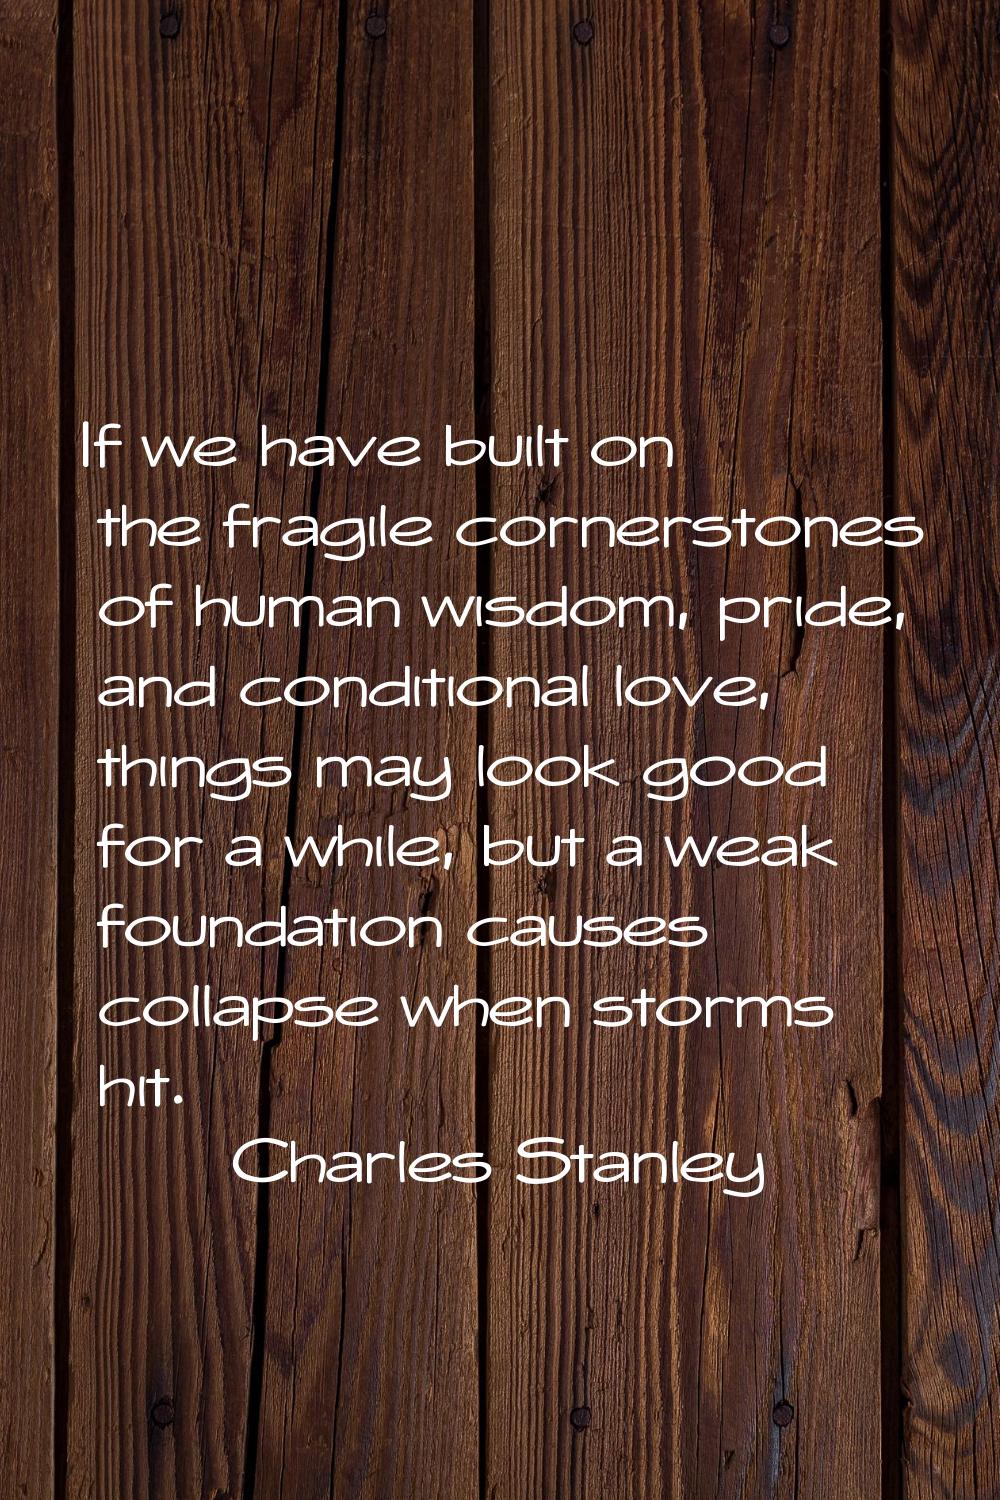 If we have built on the fragile cornerstones of human wisdom, pride, and conditional love, things m